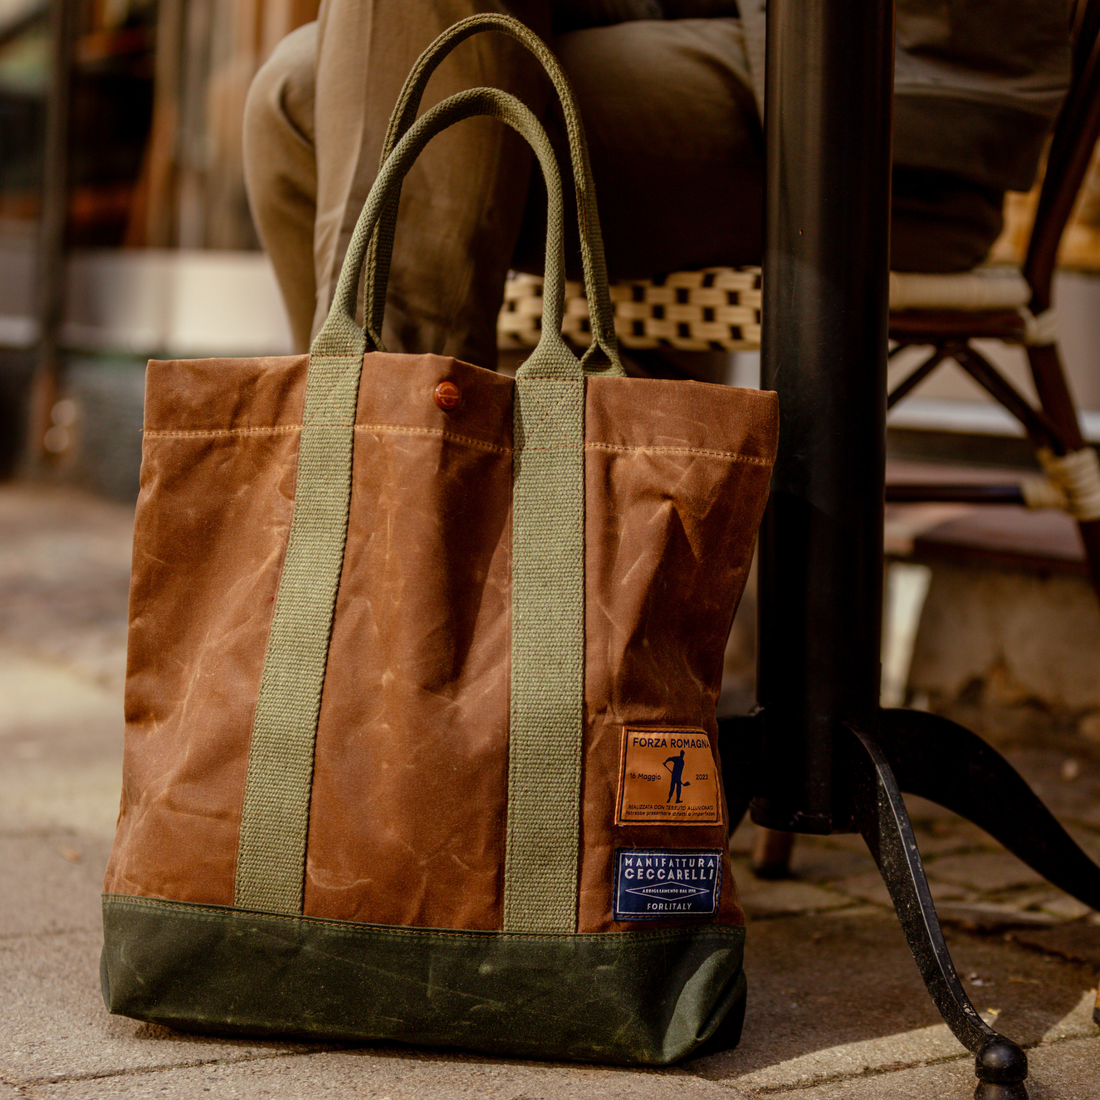 A worn leather and canvas tote bag with visible branding stands next to a seated person, placed on a sidewalk.